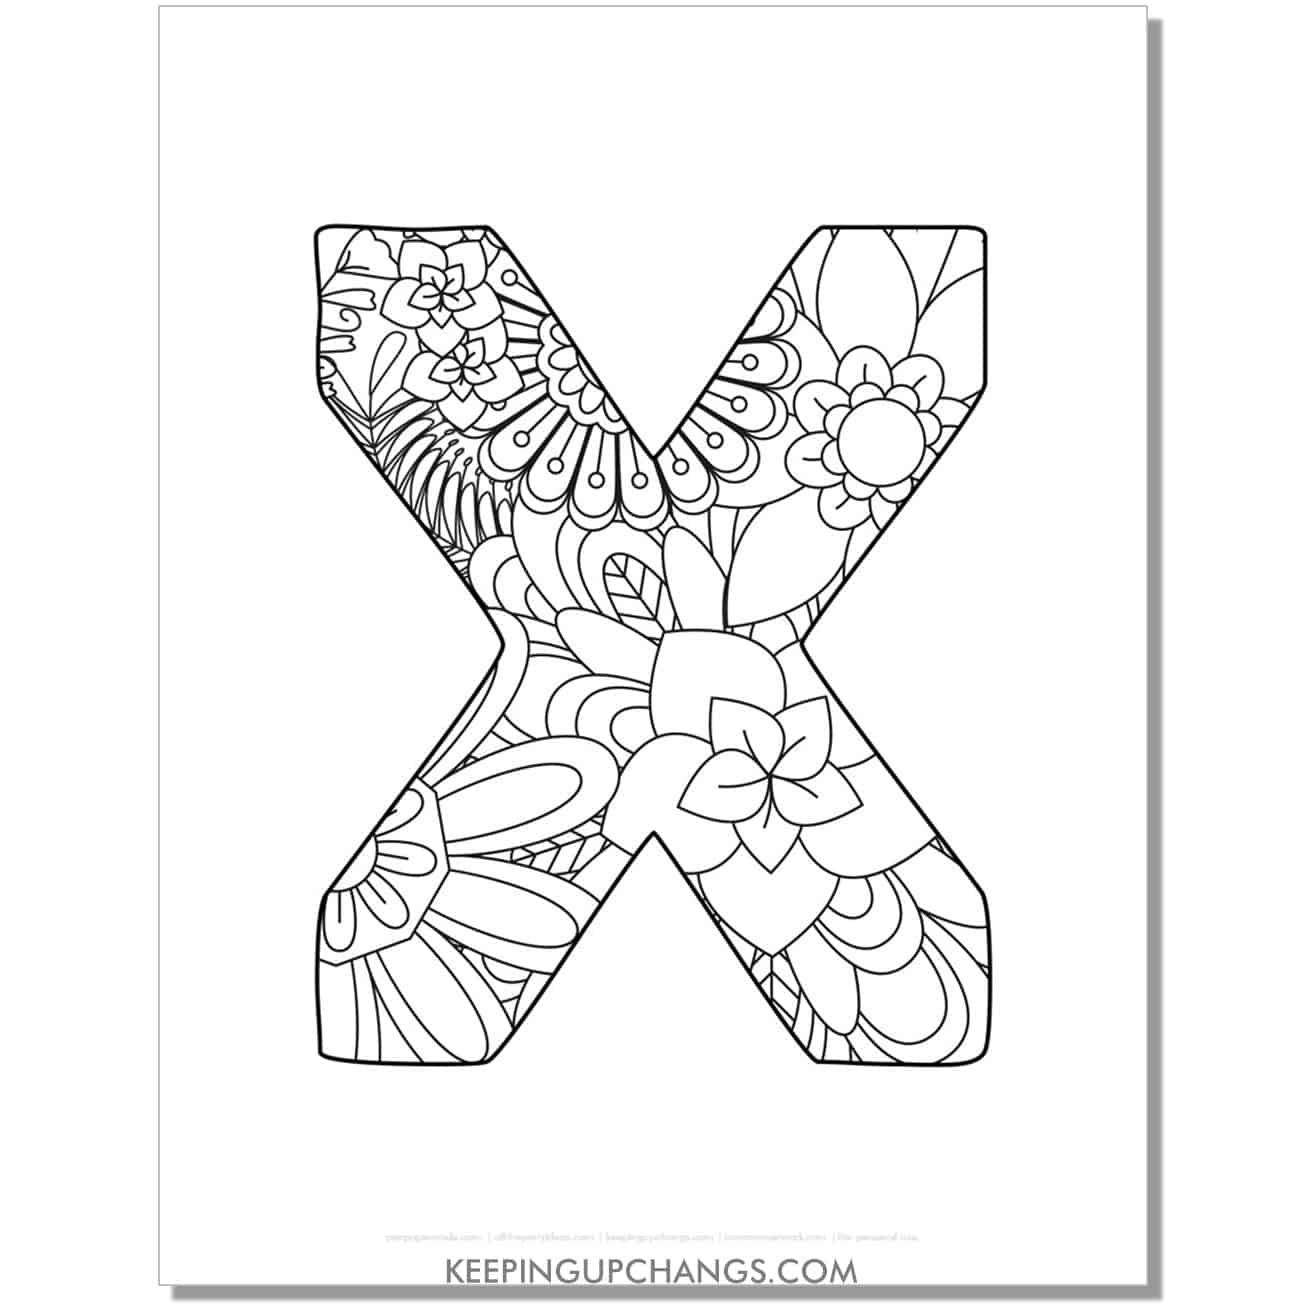 free letter x to color, complex mandala zentangle for adults.